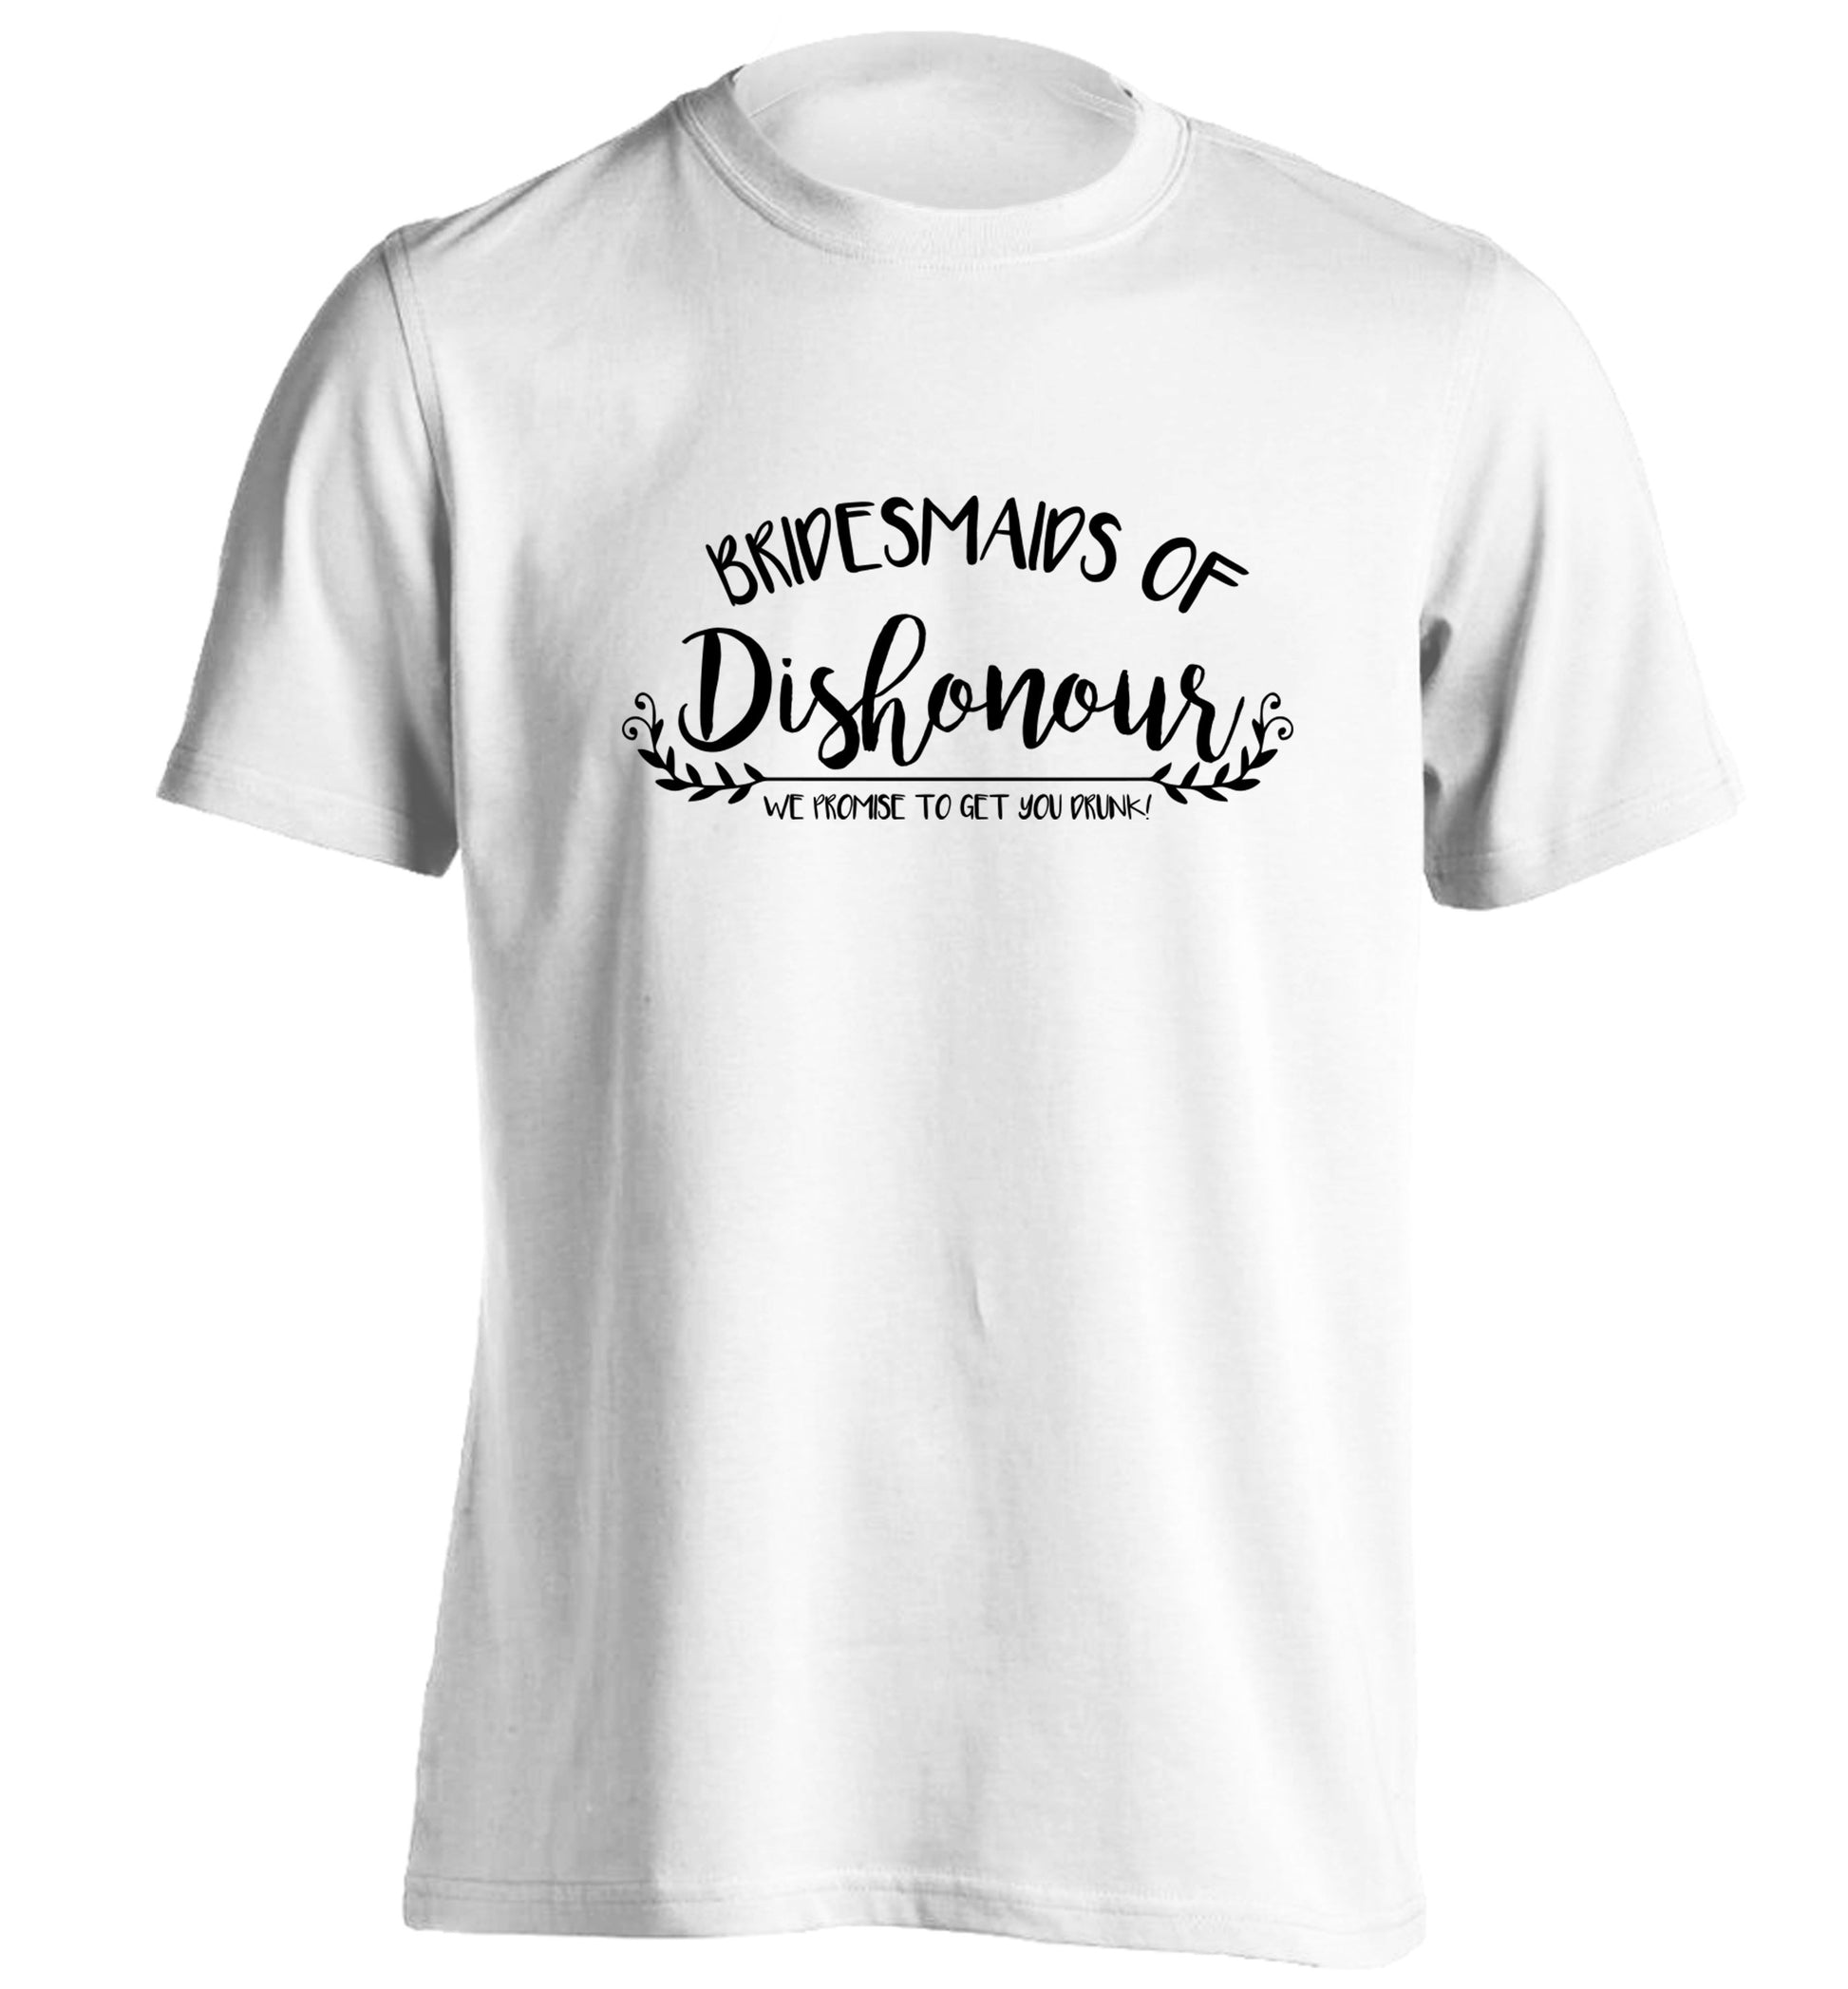 Bridesmaids of Dishonour we promise to get you drunk! adults unisex white Tshirt 2XL